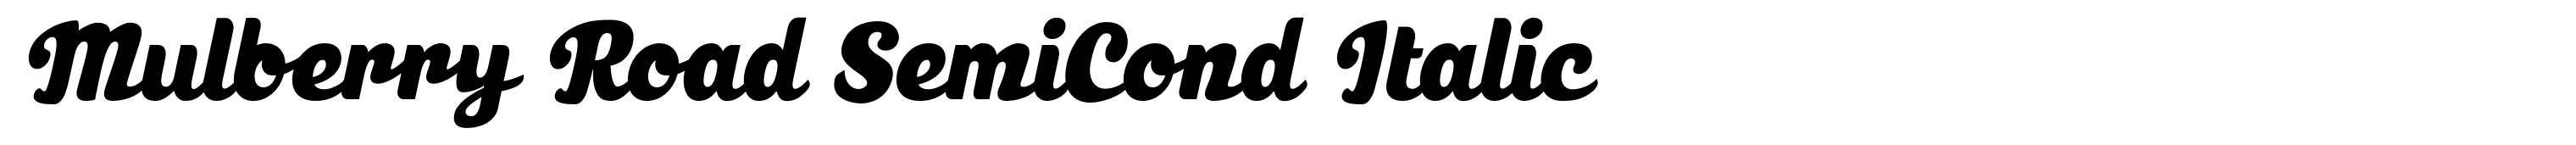 Mulberry Road SemiCond Italic